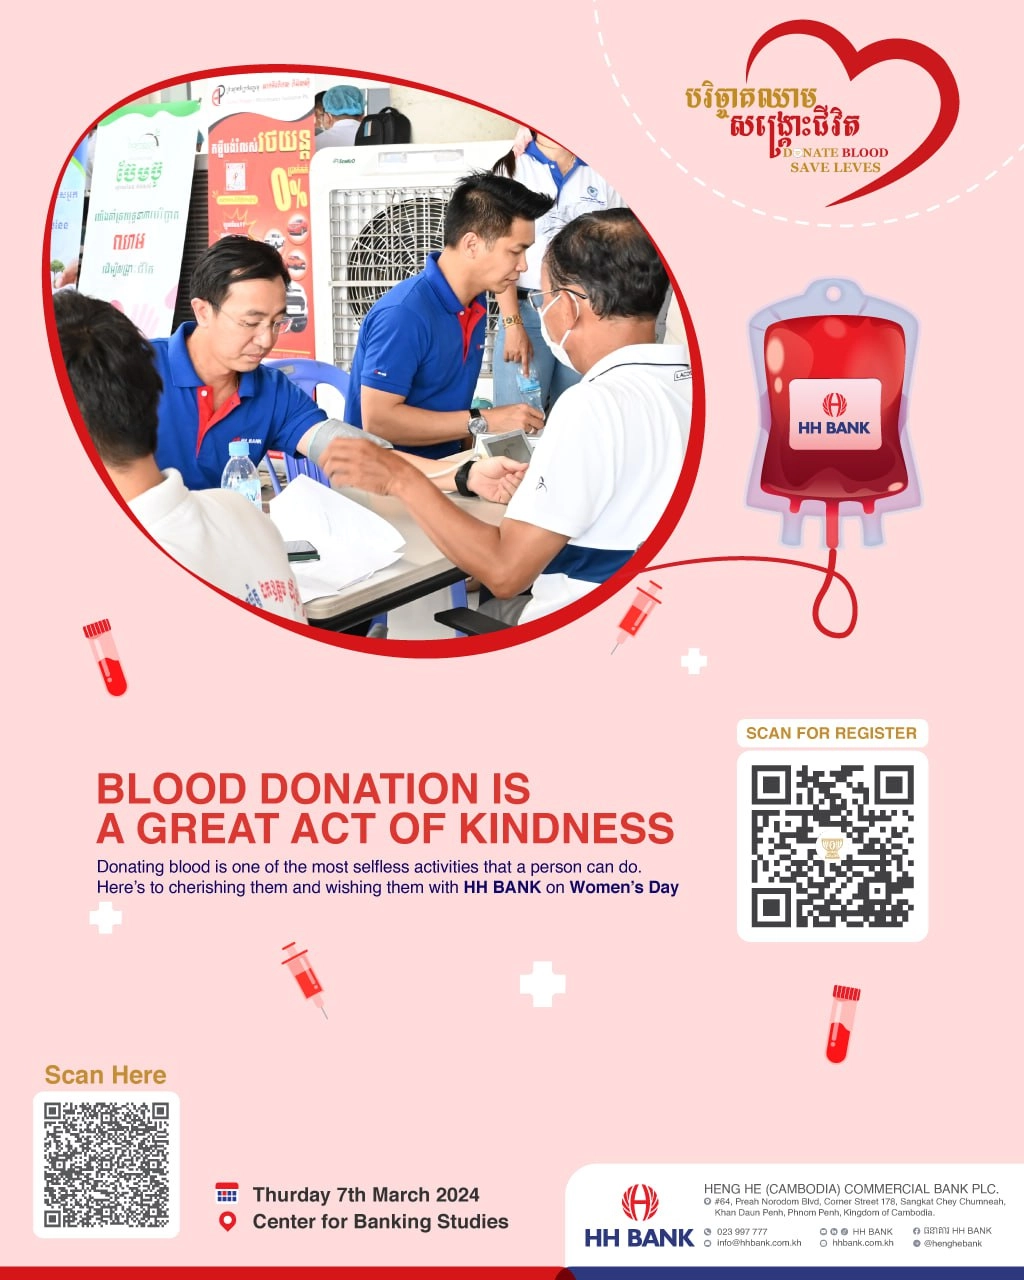 Give blood, give hope, save lives!